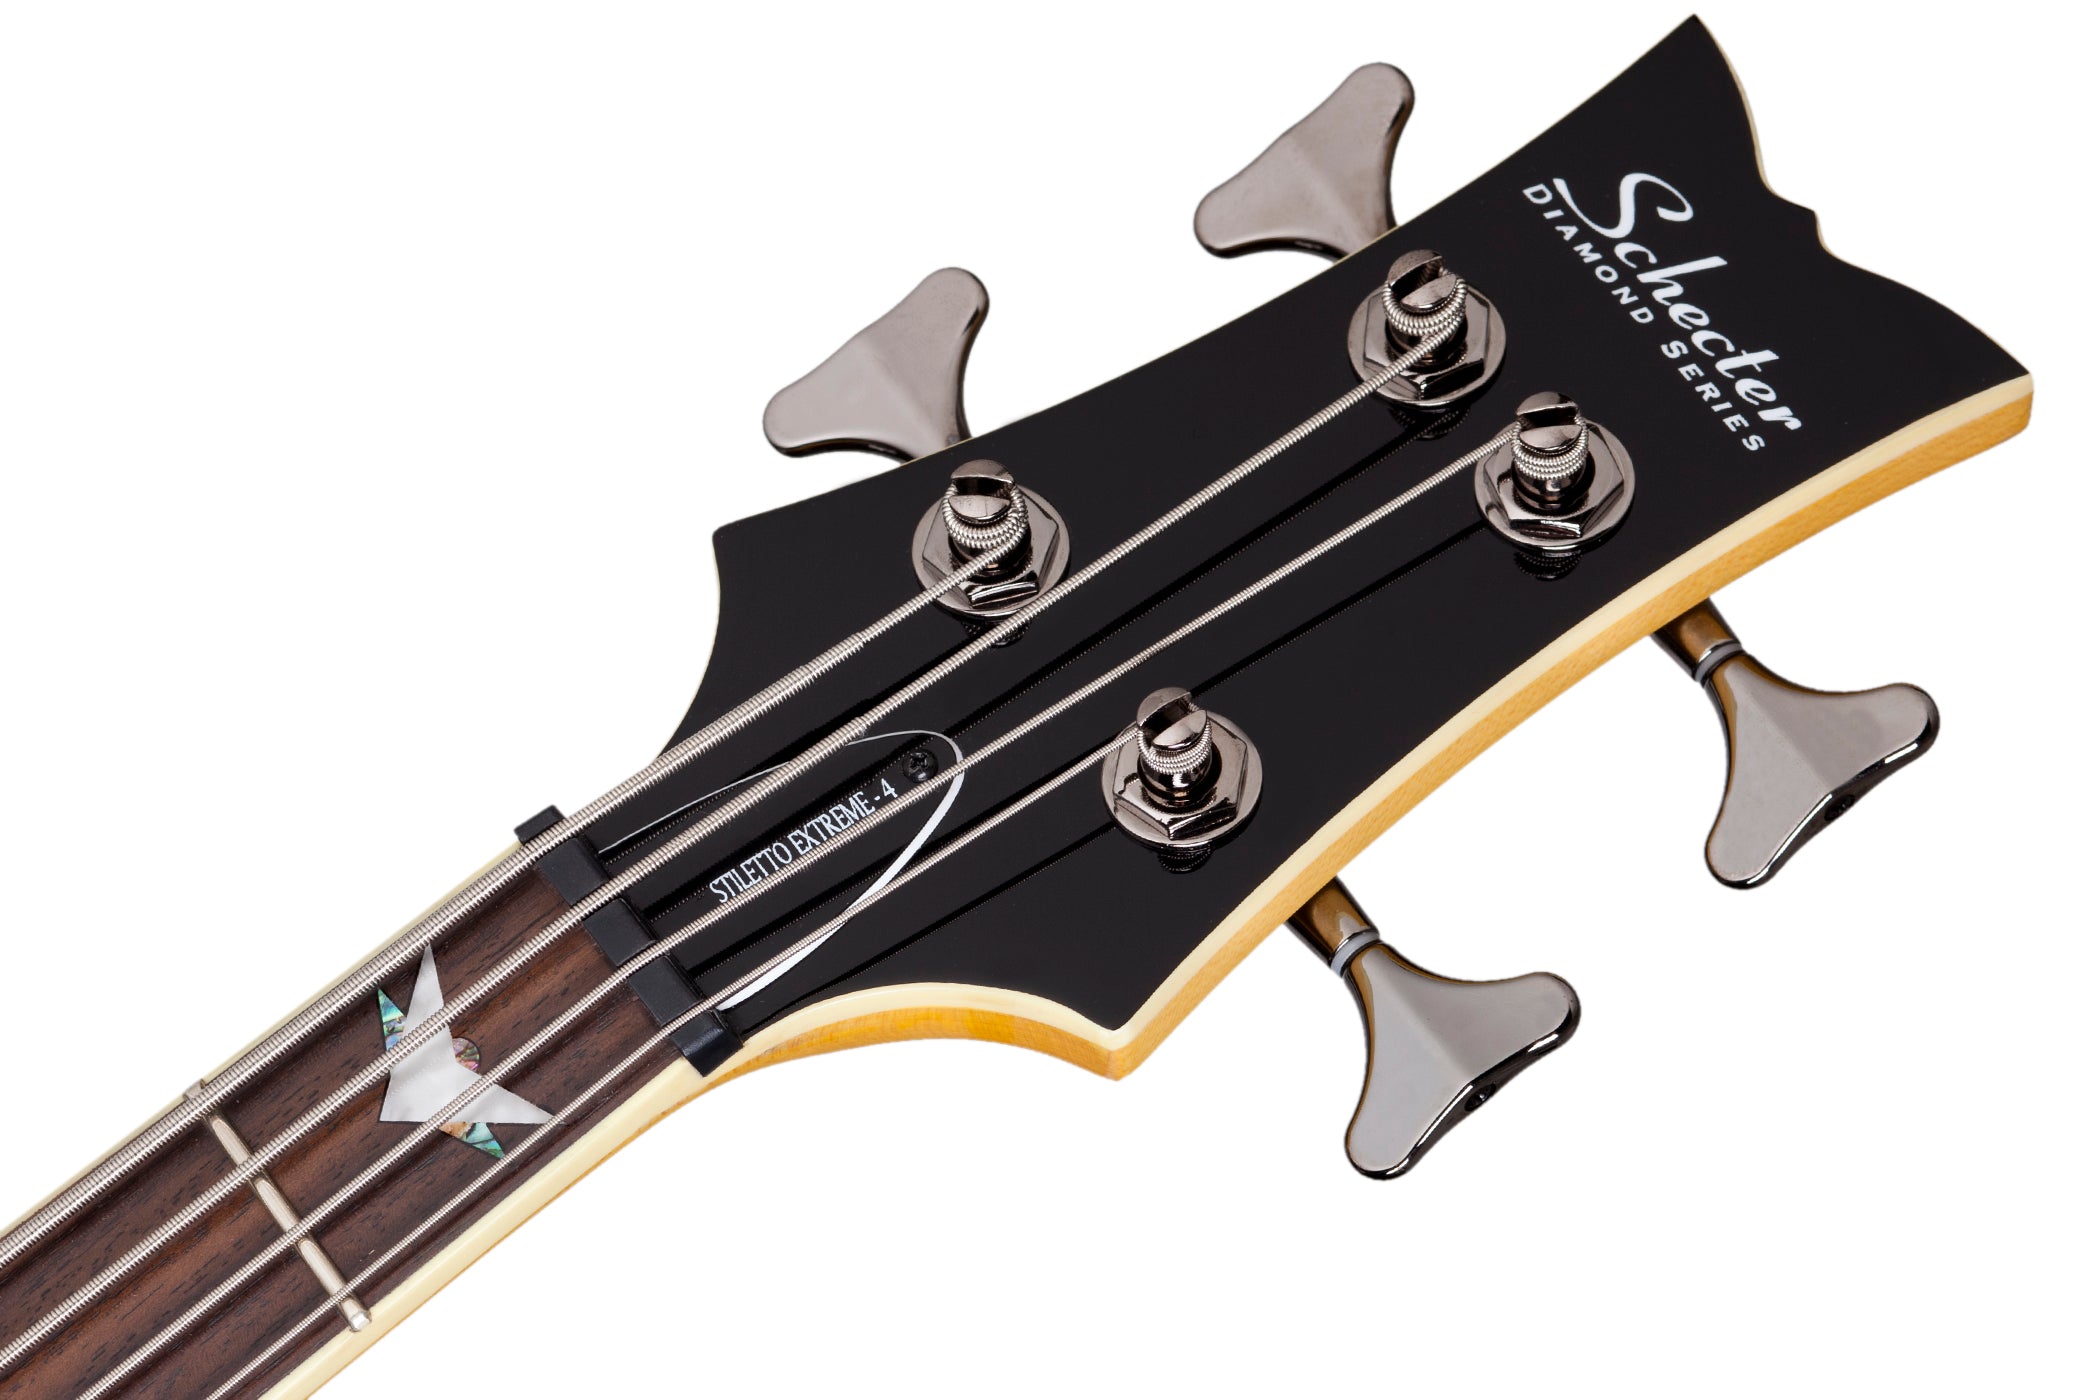 SCHECTER STILETTO EXTREME-4 STRING BASS GUITAR - BLACK CHERRY (2500) MADE IN INDONESIA, SCHECTER, BASS GUITAR, schecter-bass-guitar-stiletto-extreme4-bc, ZOSO MUSIC SDN BHD